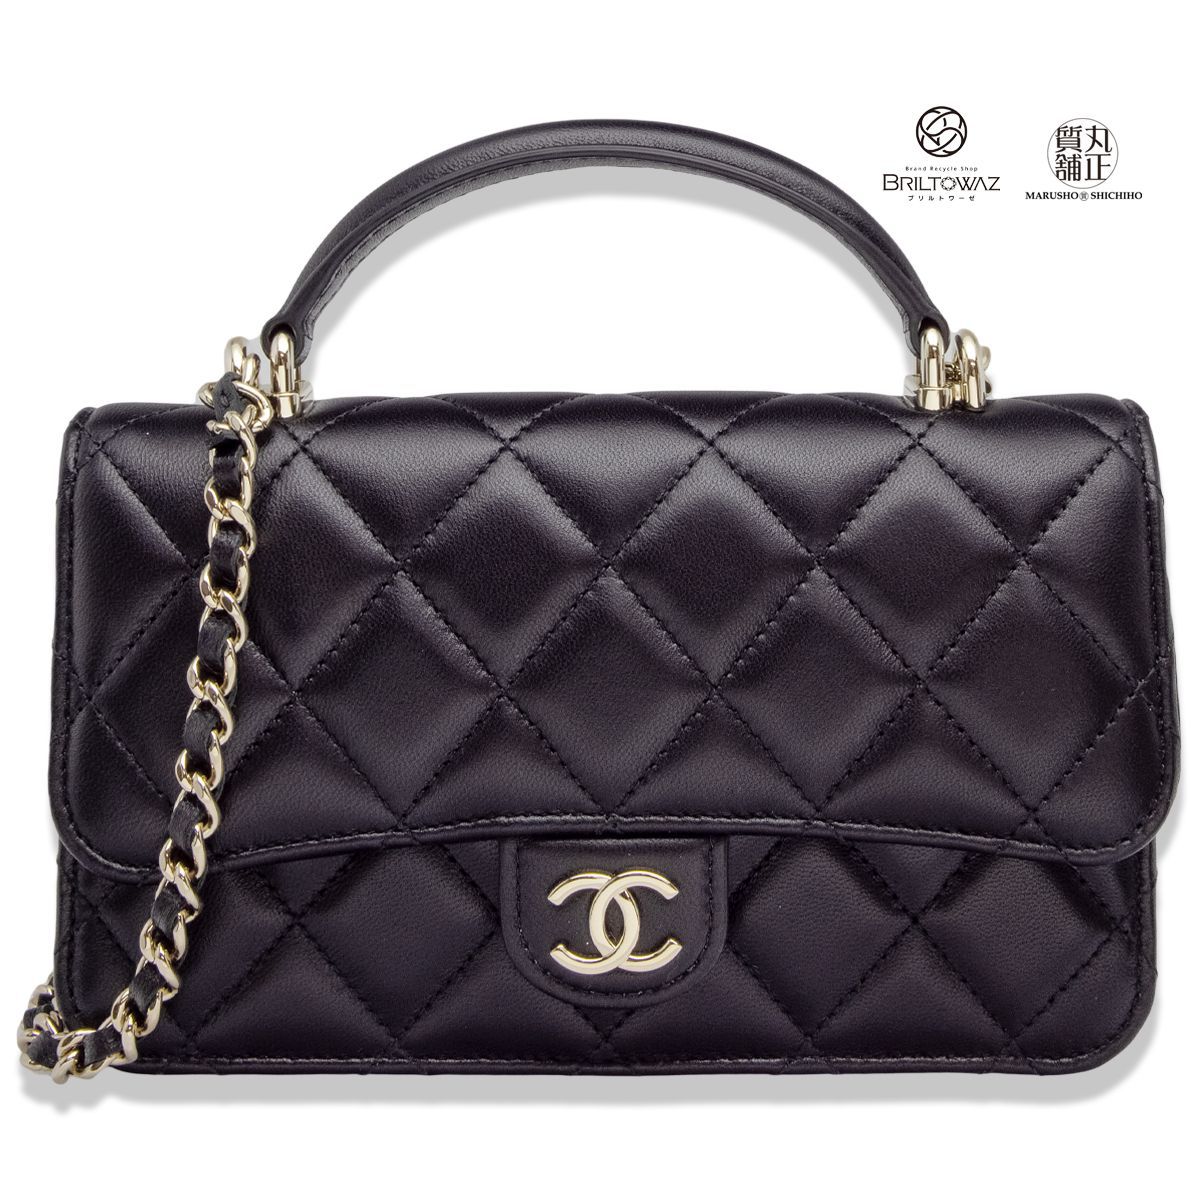 CHANEL★LES PINCEAUX CHANEL ブラシポーチ★新品